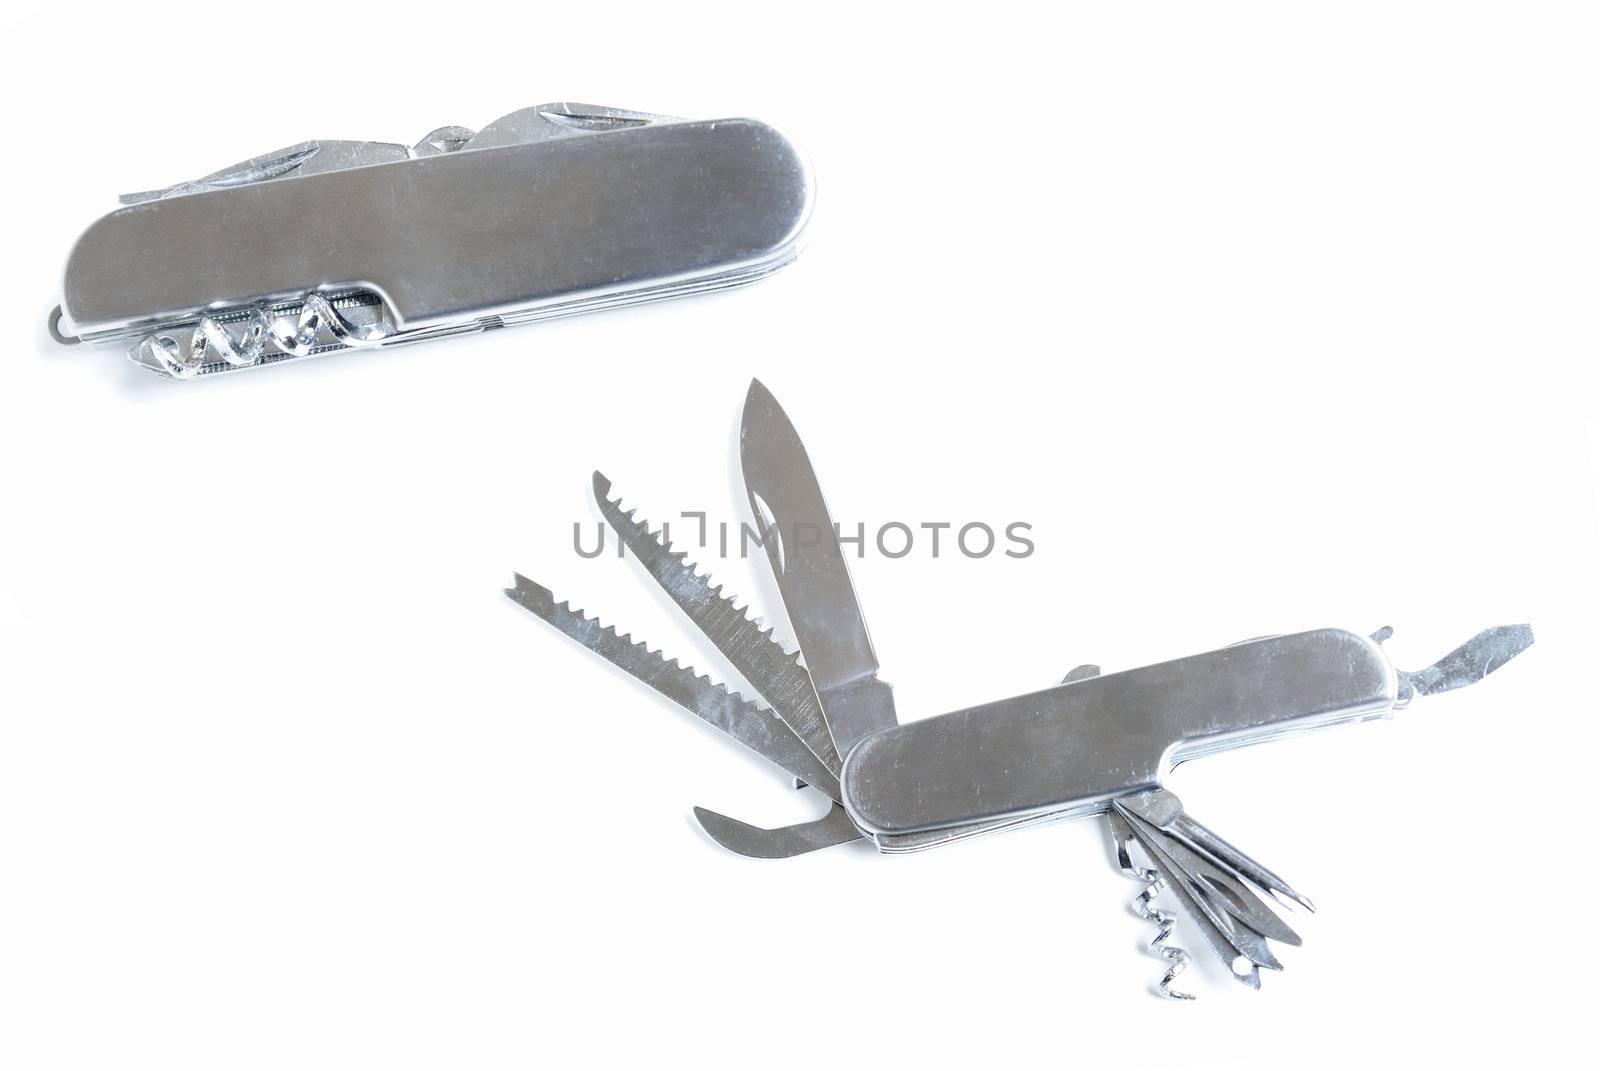 A small metal pocket knife on white background.